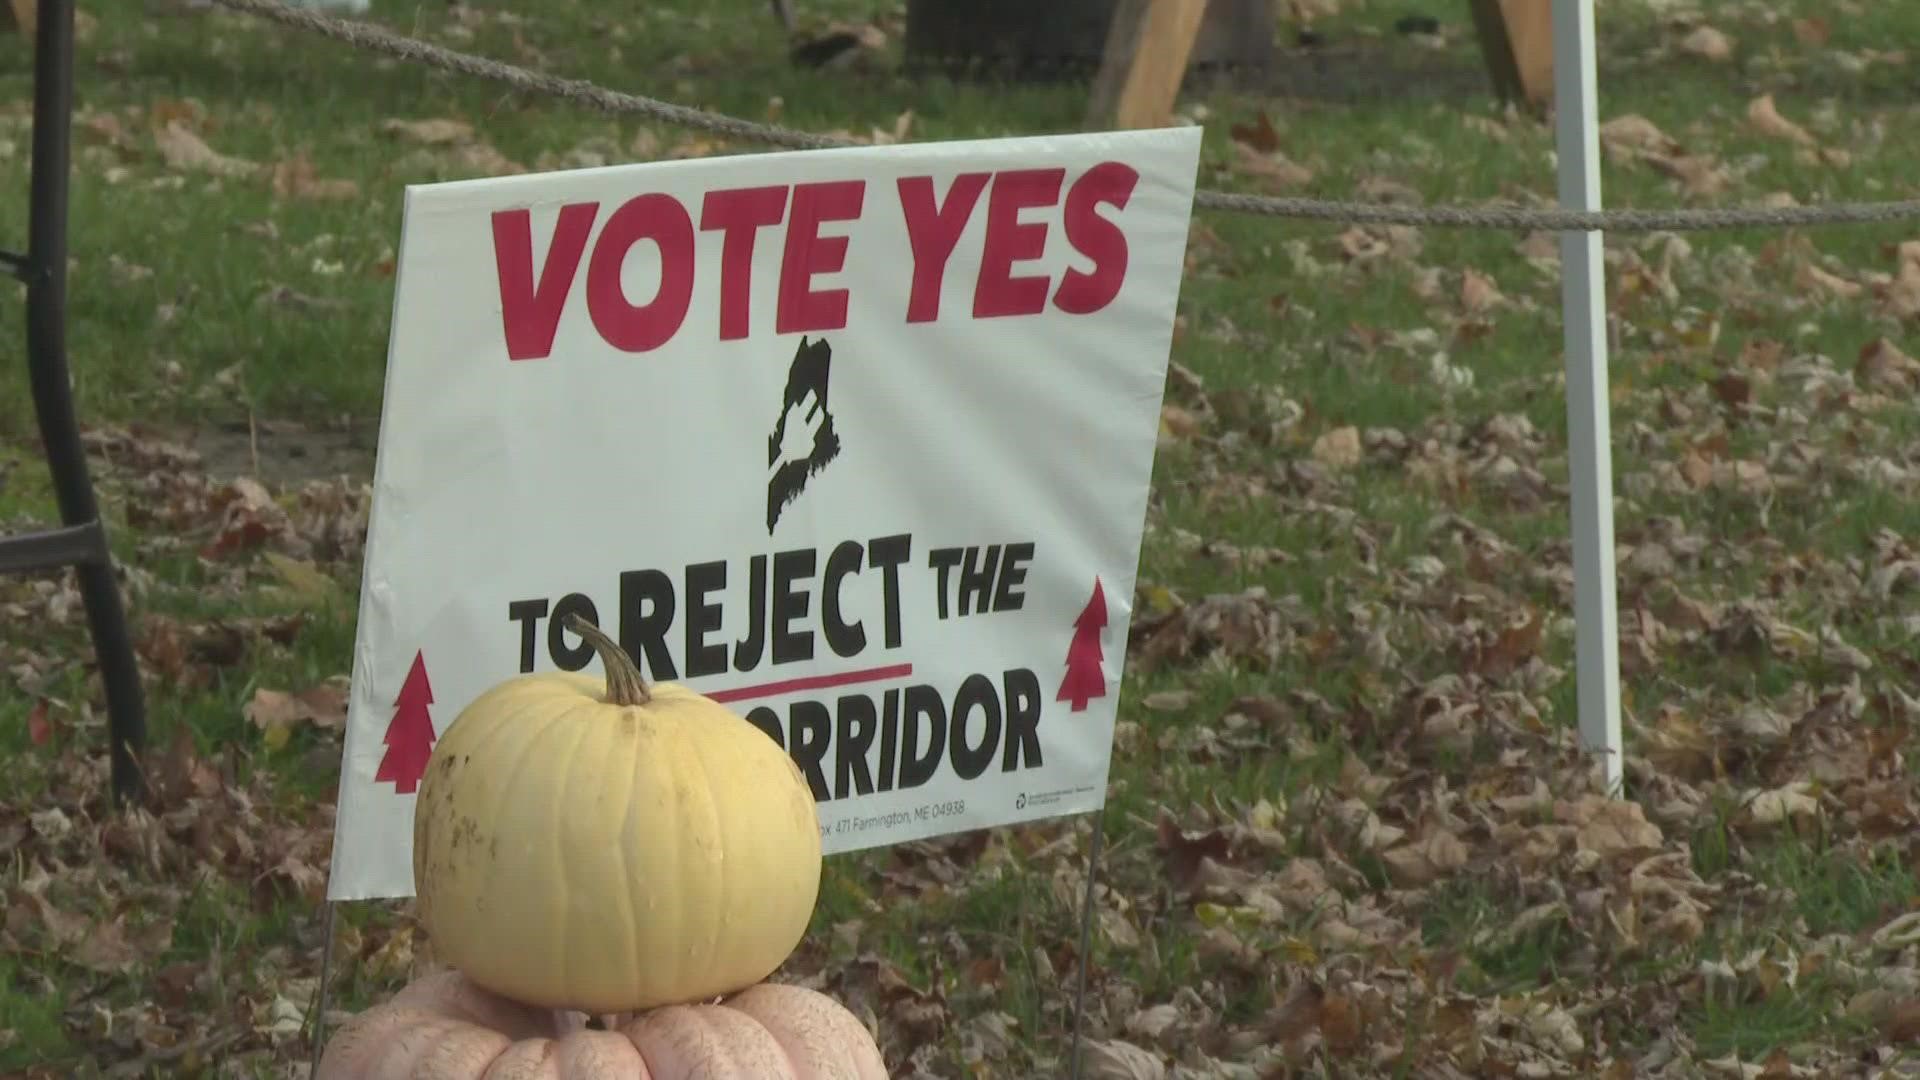 As the final voters head to the polls to cast their votes, the 'Yes on 1' campaign, which opposes the CMP corridor, held a gathering for its volunteers.